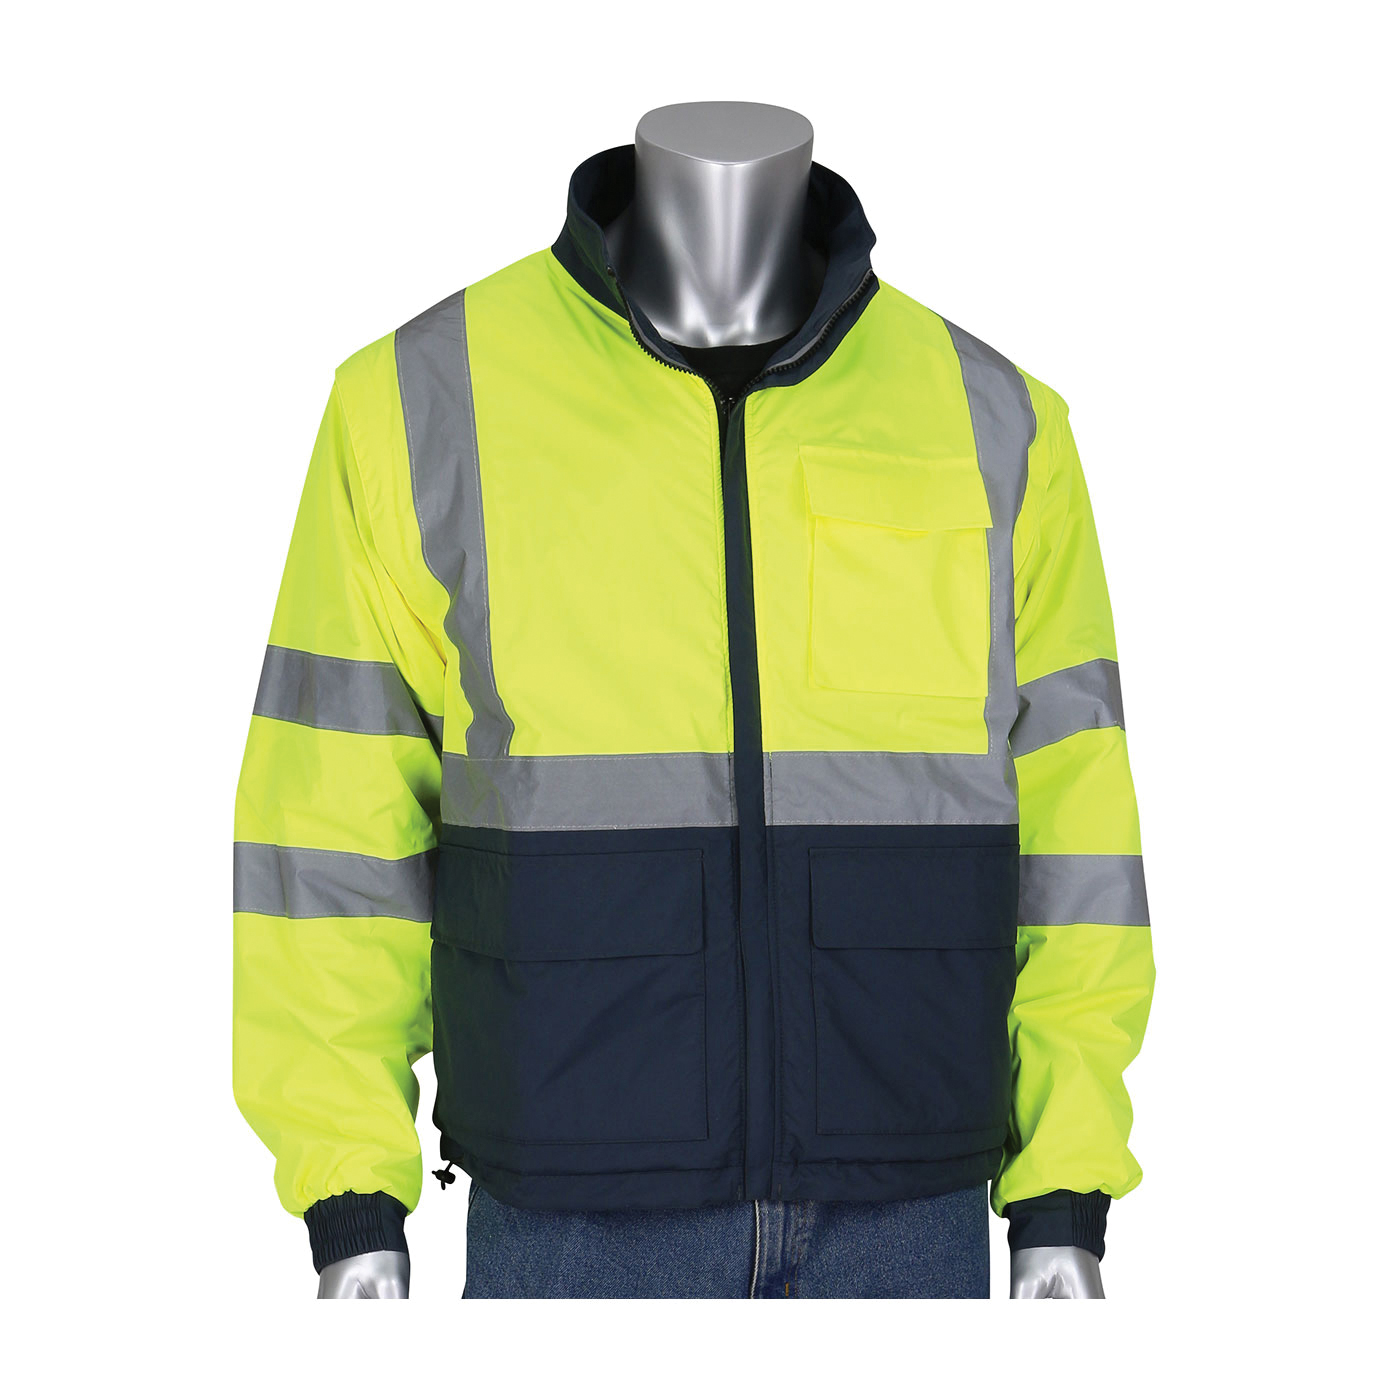 PIP® 333-1500-R/XL 333-1500-R 4-in-1 Multi-Seasonal Lightweight Reversible Windbreaker Jacket With Detachable Sleeves, Dark Gray/Hi-Viz Lime Yellow, Polyester, 53.3 in Chest, Resists: Water, ANSI 107 Type R Class 3